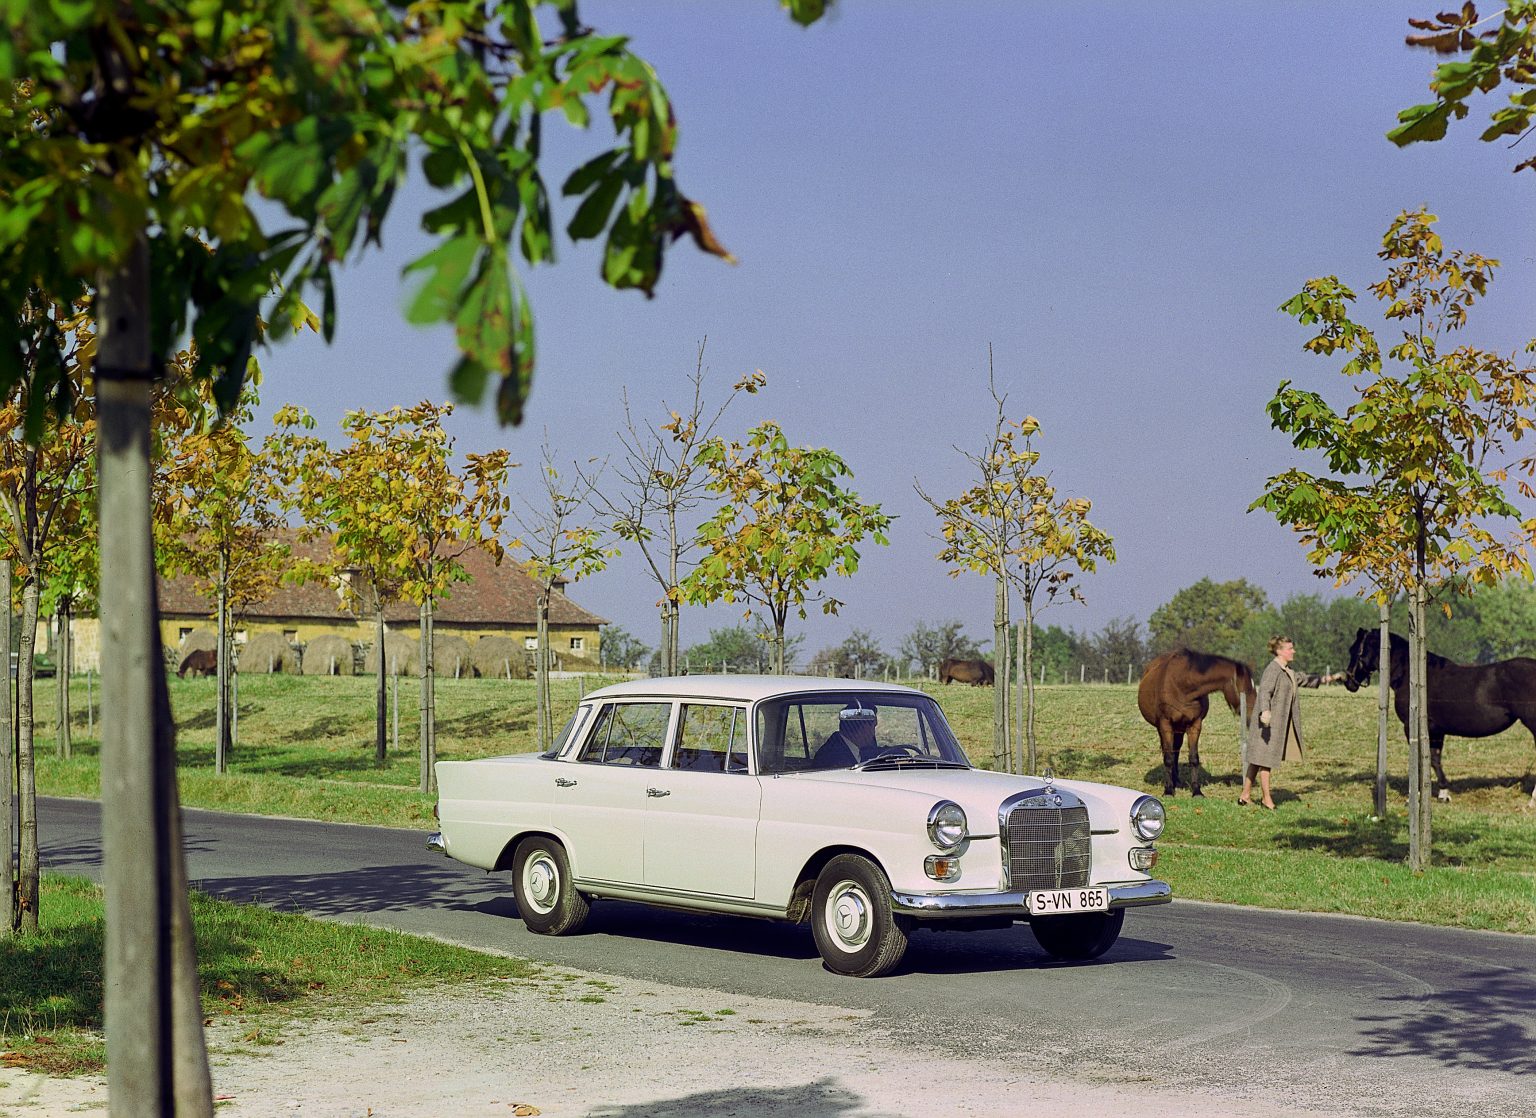 In the countryside: Mercedes-Benz from the "Fintail" W110 series (1961 to 1968).